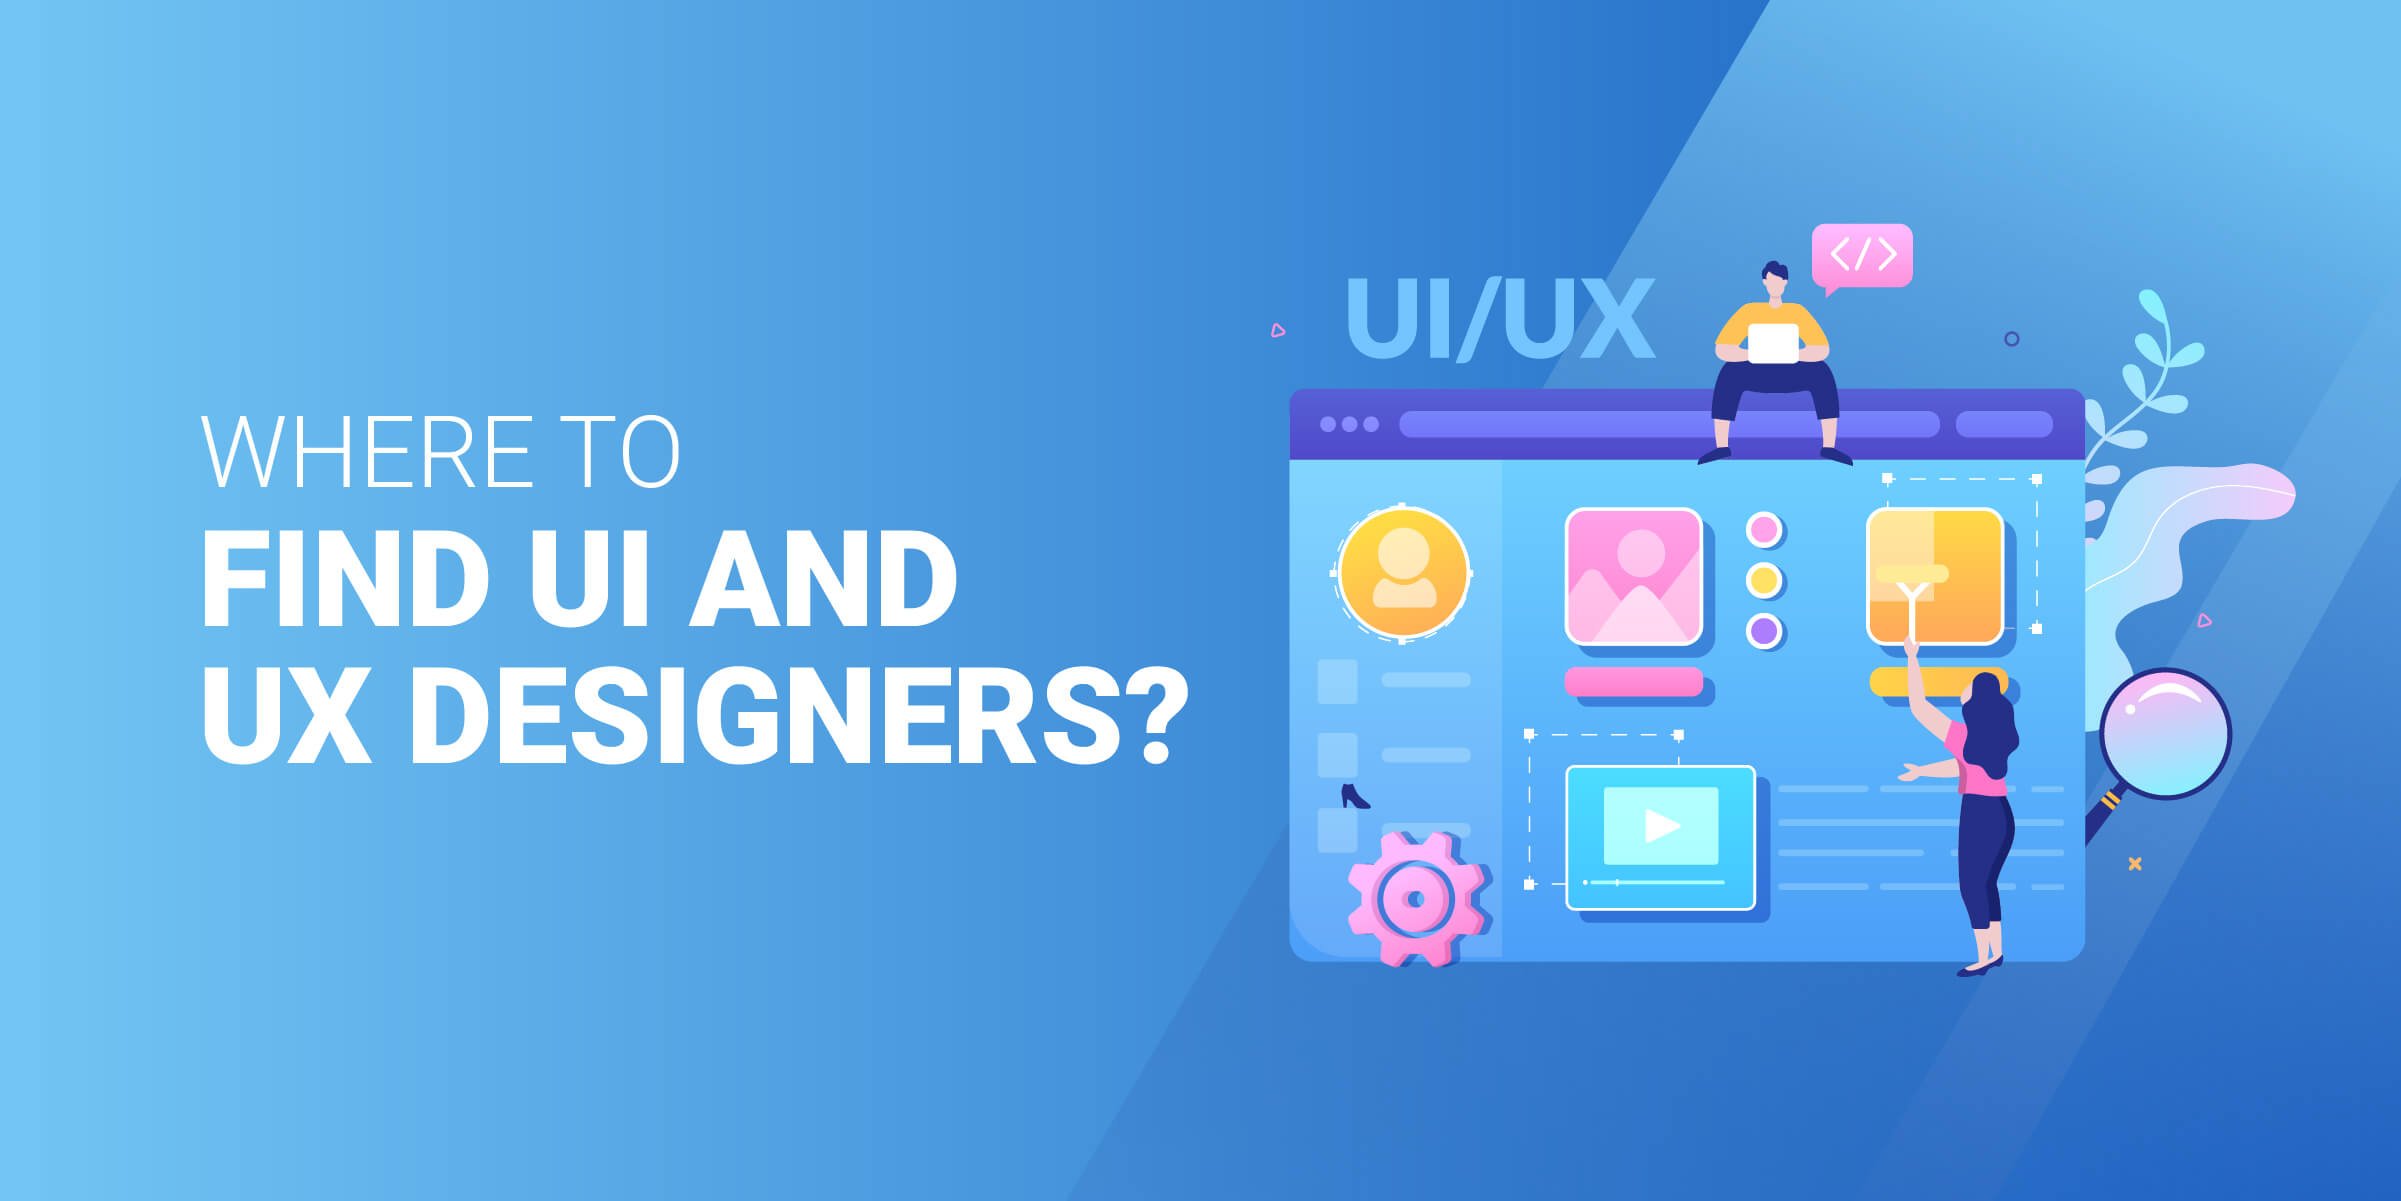 Where to Find UI UX Designers